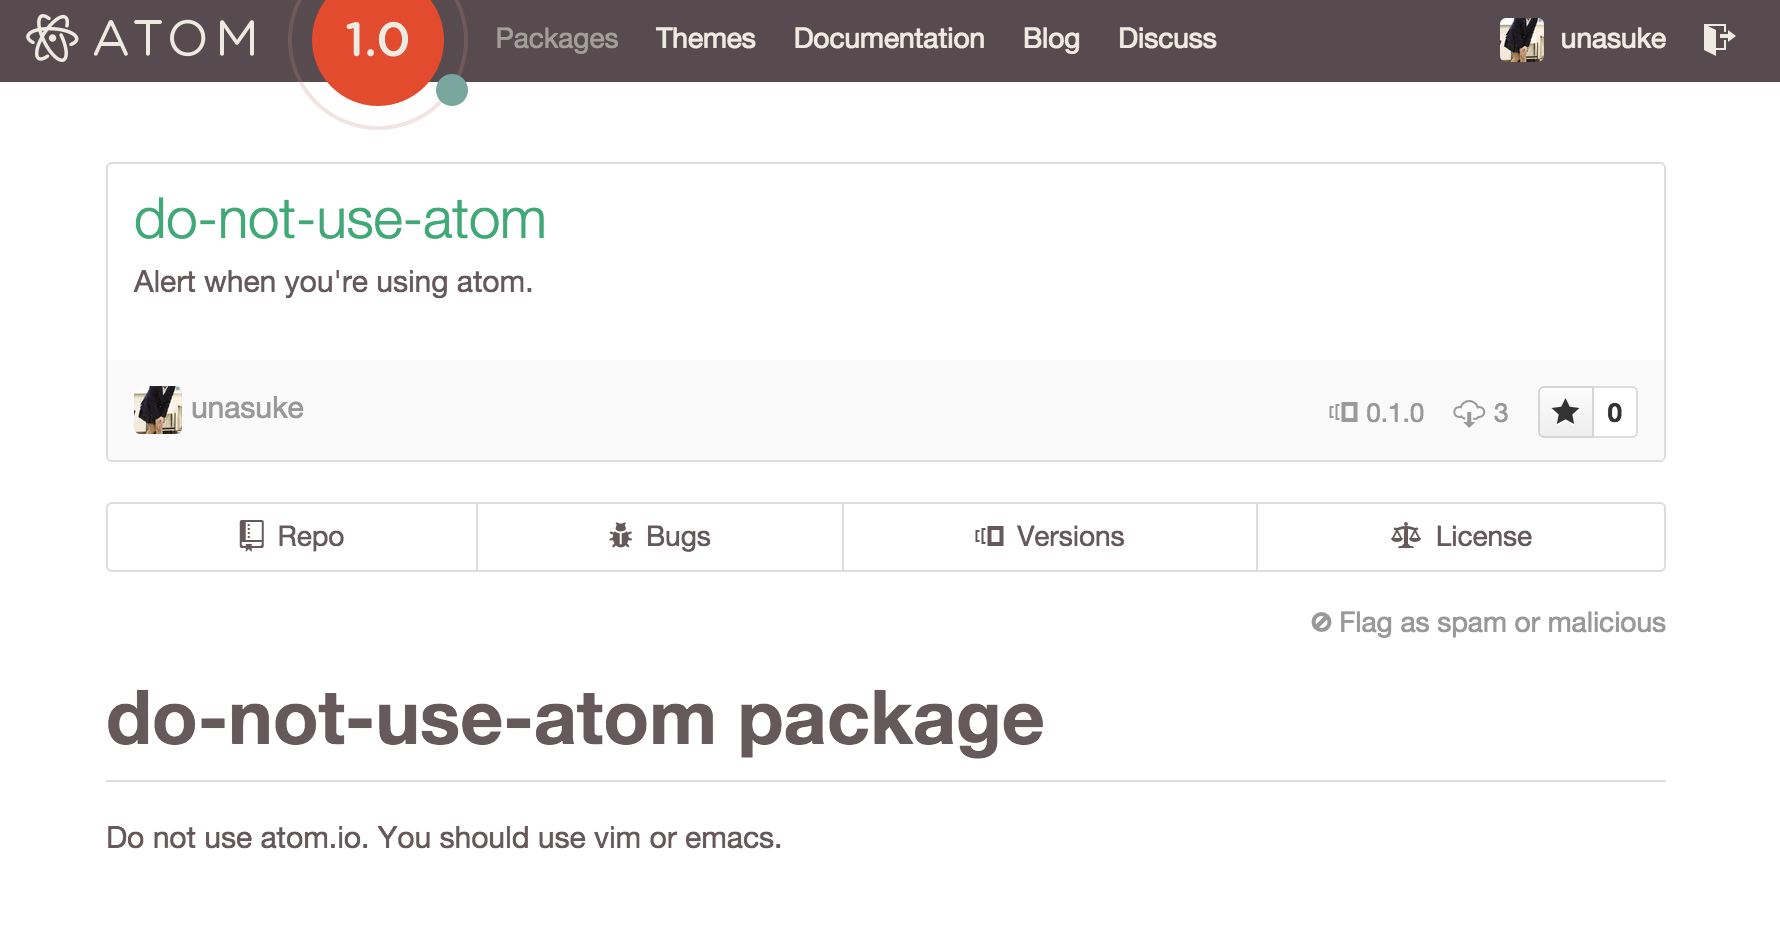 do-not-use-atom page